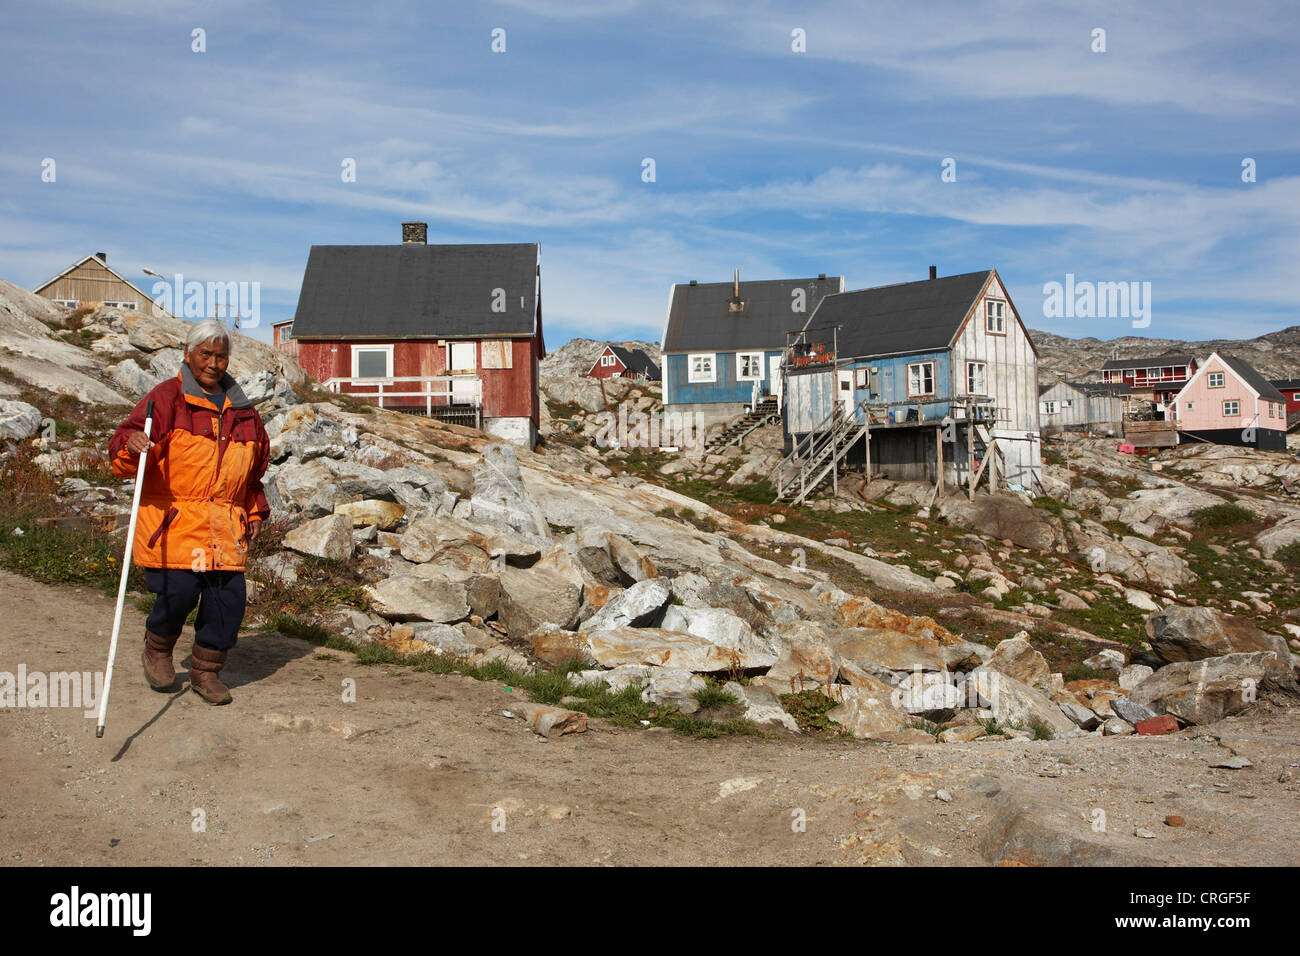 elderly inuit woman in front of wooden houses, Greenland, Ammassalik, East Greenland, Tiniteqilaq Stock Photo